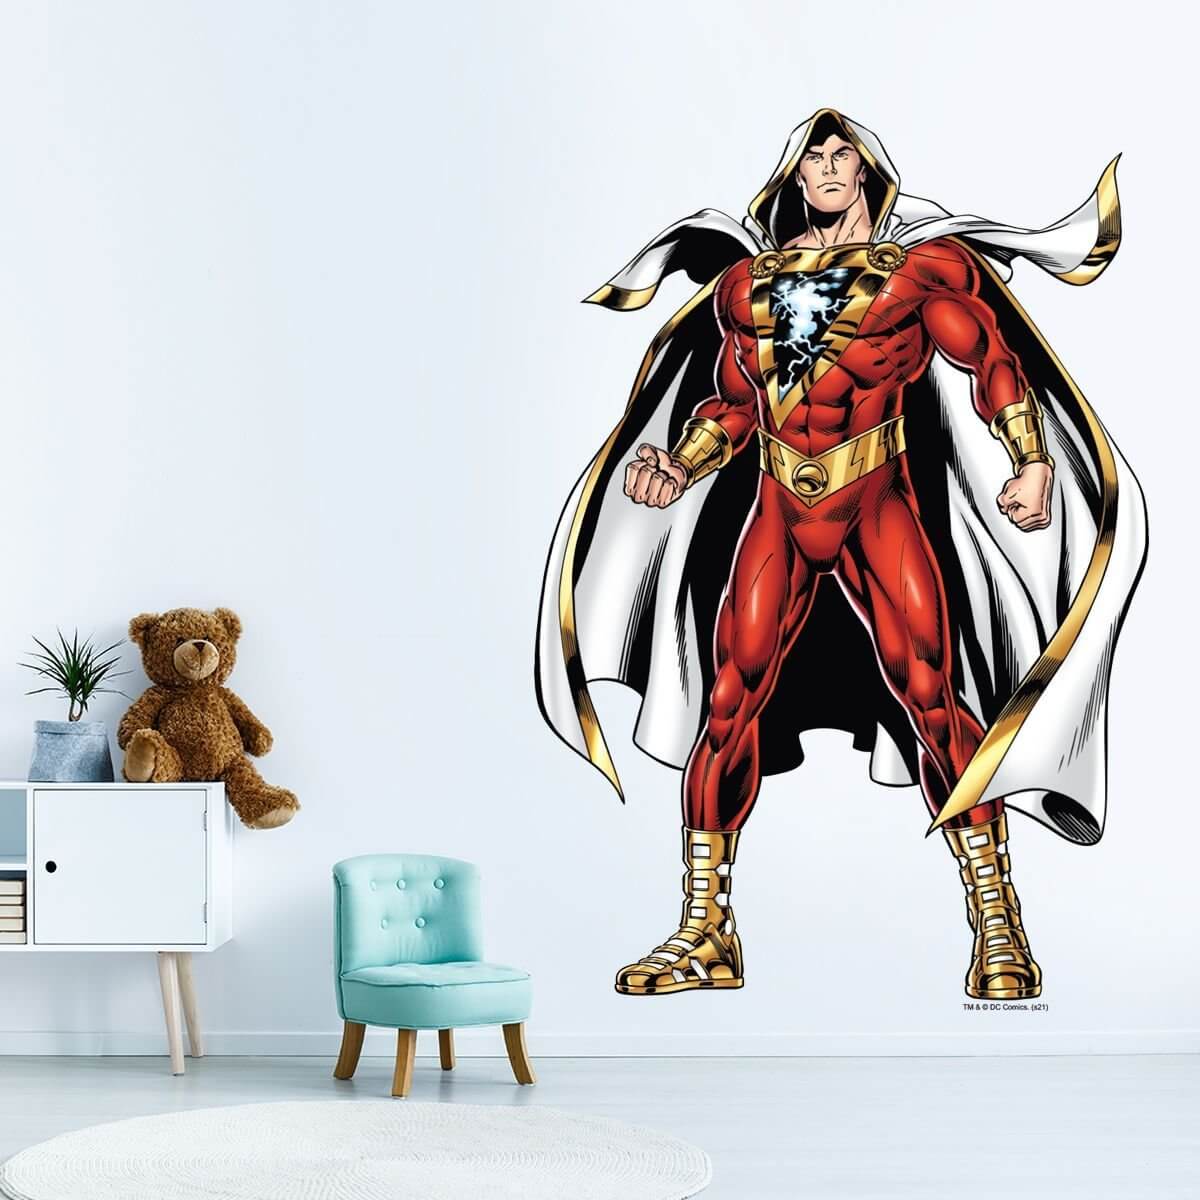 Kismet Decals Shazam! Captain Thunder Licensed Wall Sticker - Easy DIY Justice League Home & Room Decor Wall Art - Kismet Decals